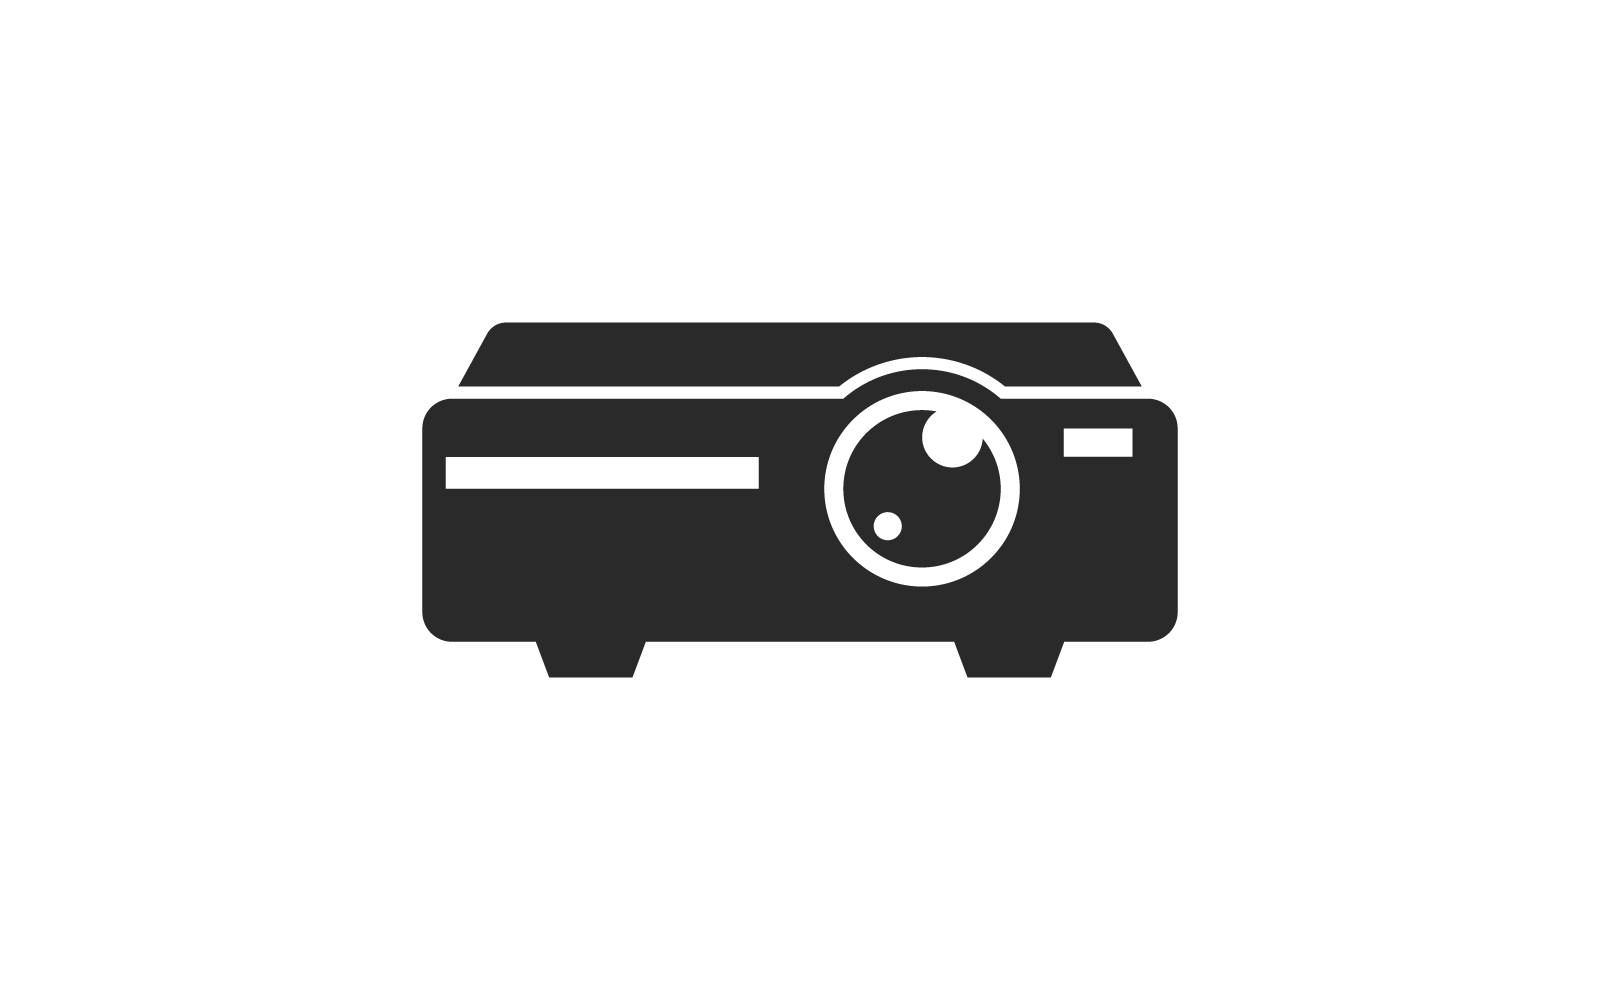 Projector icon in flat design template